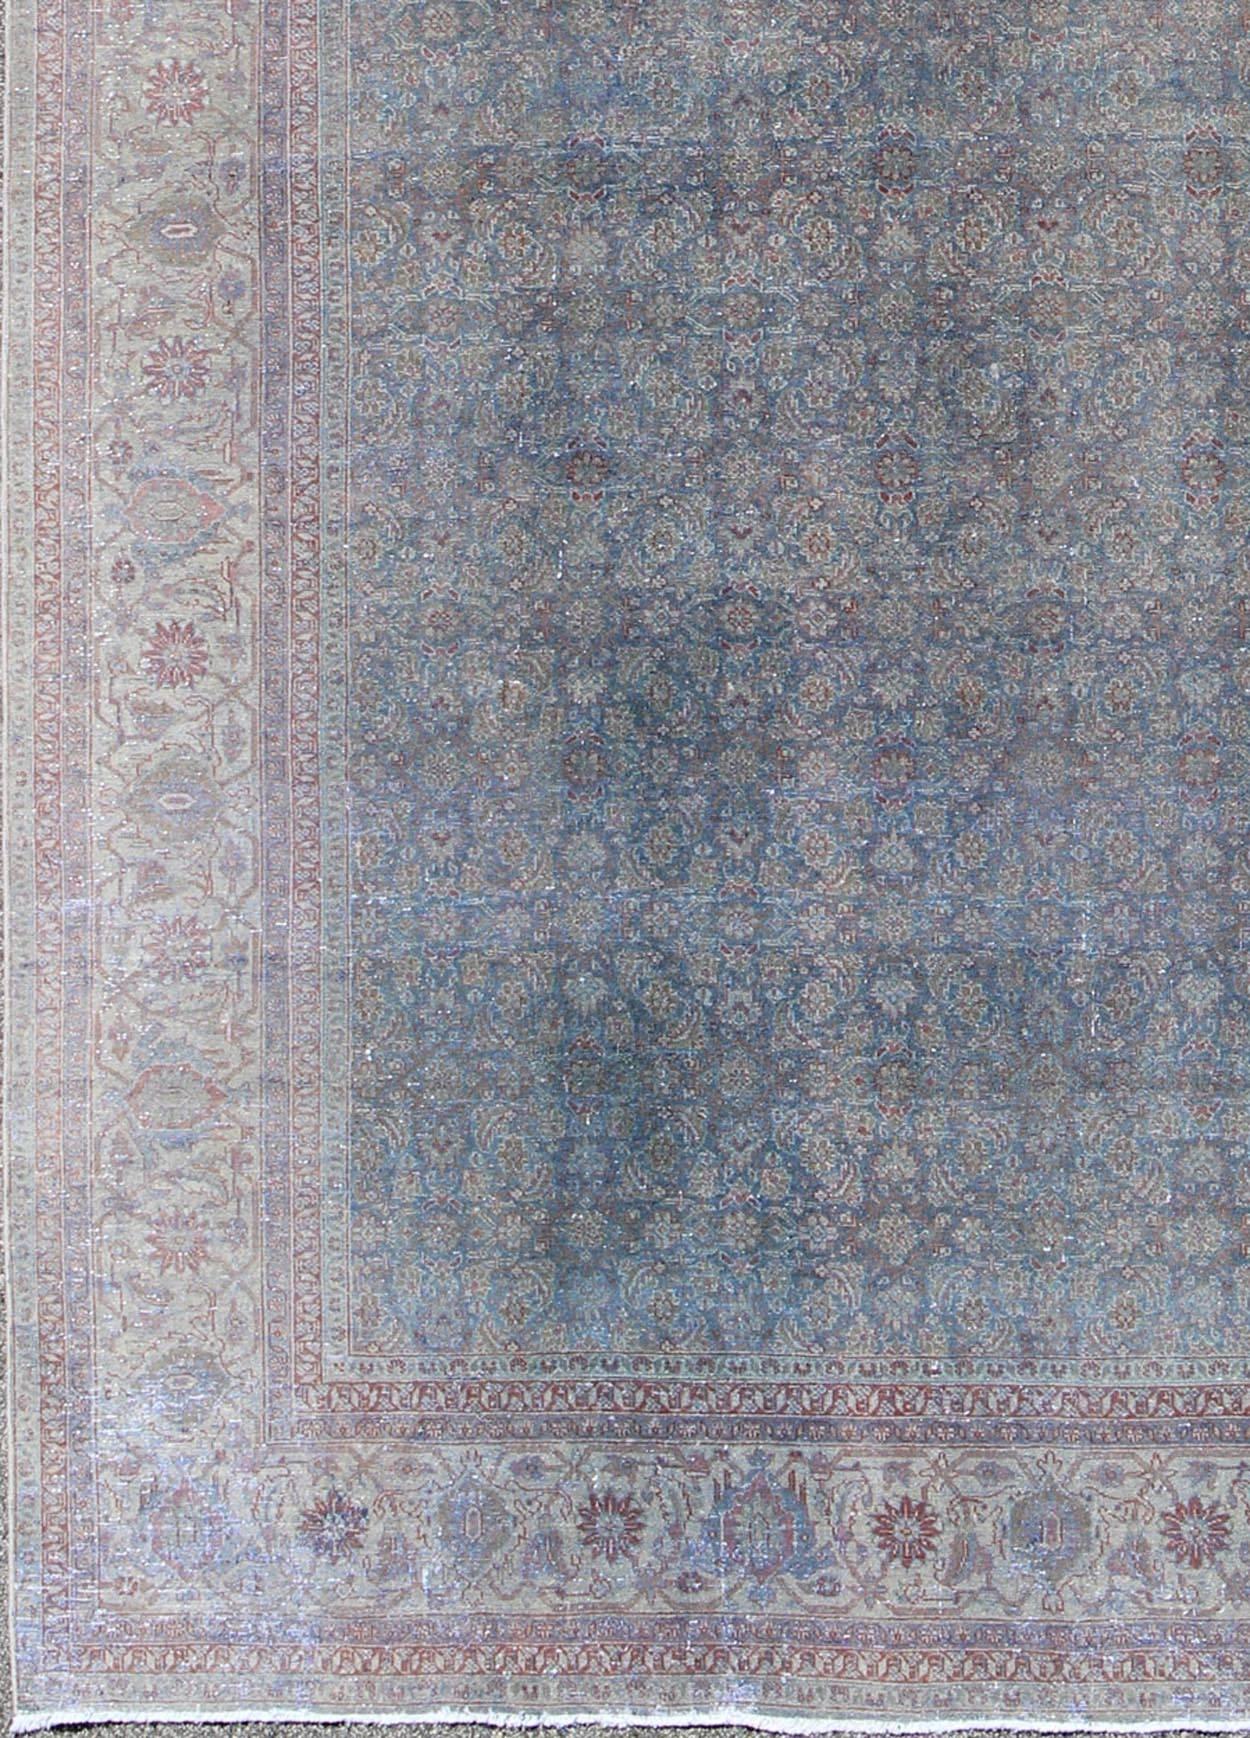 Large all-over Herati design antique distressed Persian Tabriz rug in shades of light blue grey and soft red, Keivan Woven Arts / rug#17-1102, country of origin / type: Iran / Tabriz, circa 1930

Measures: 9'9 x 13'5.

This antique large Persian